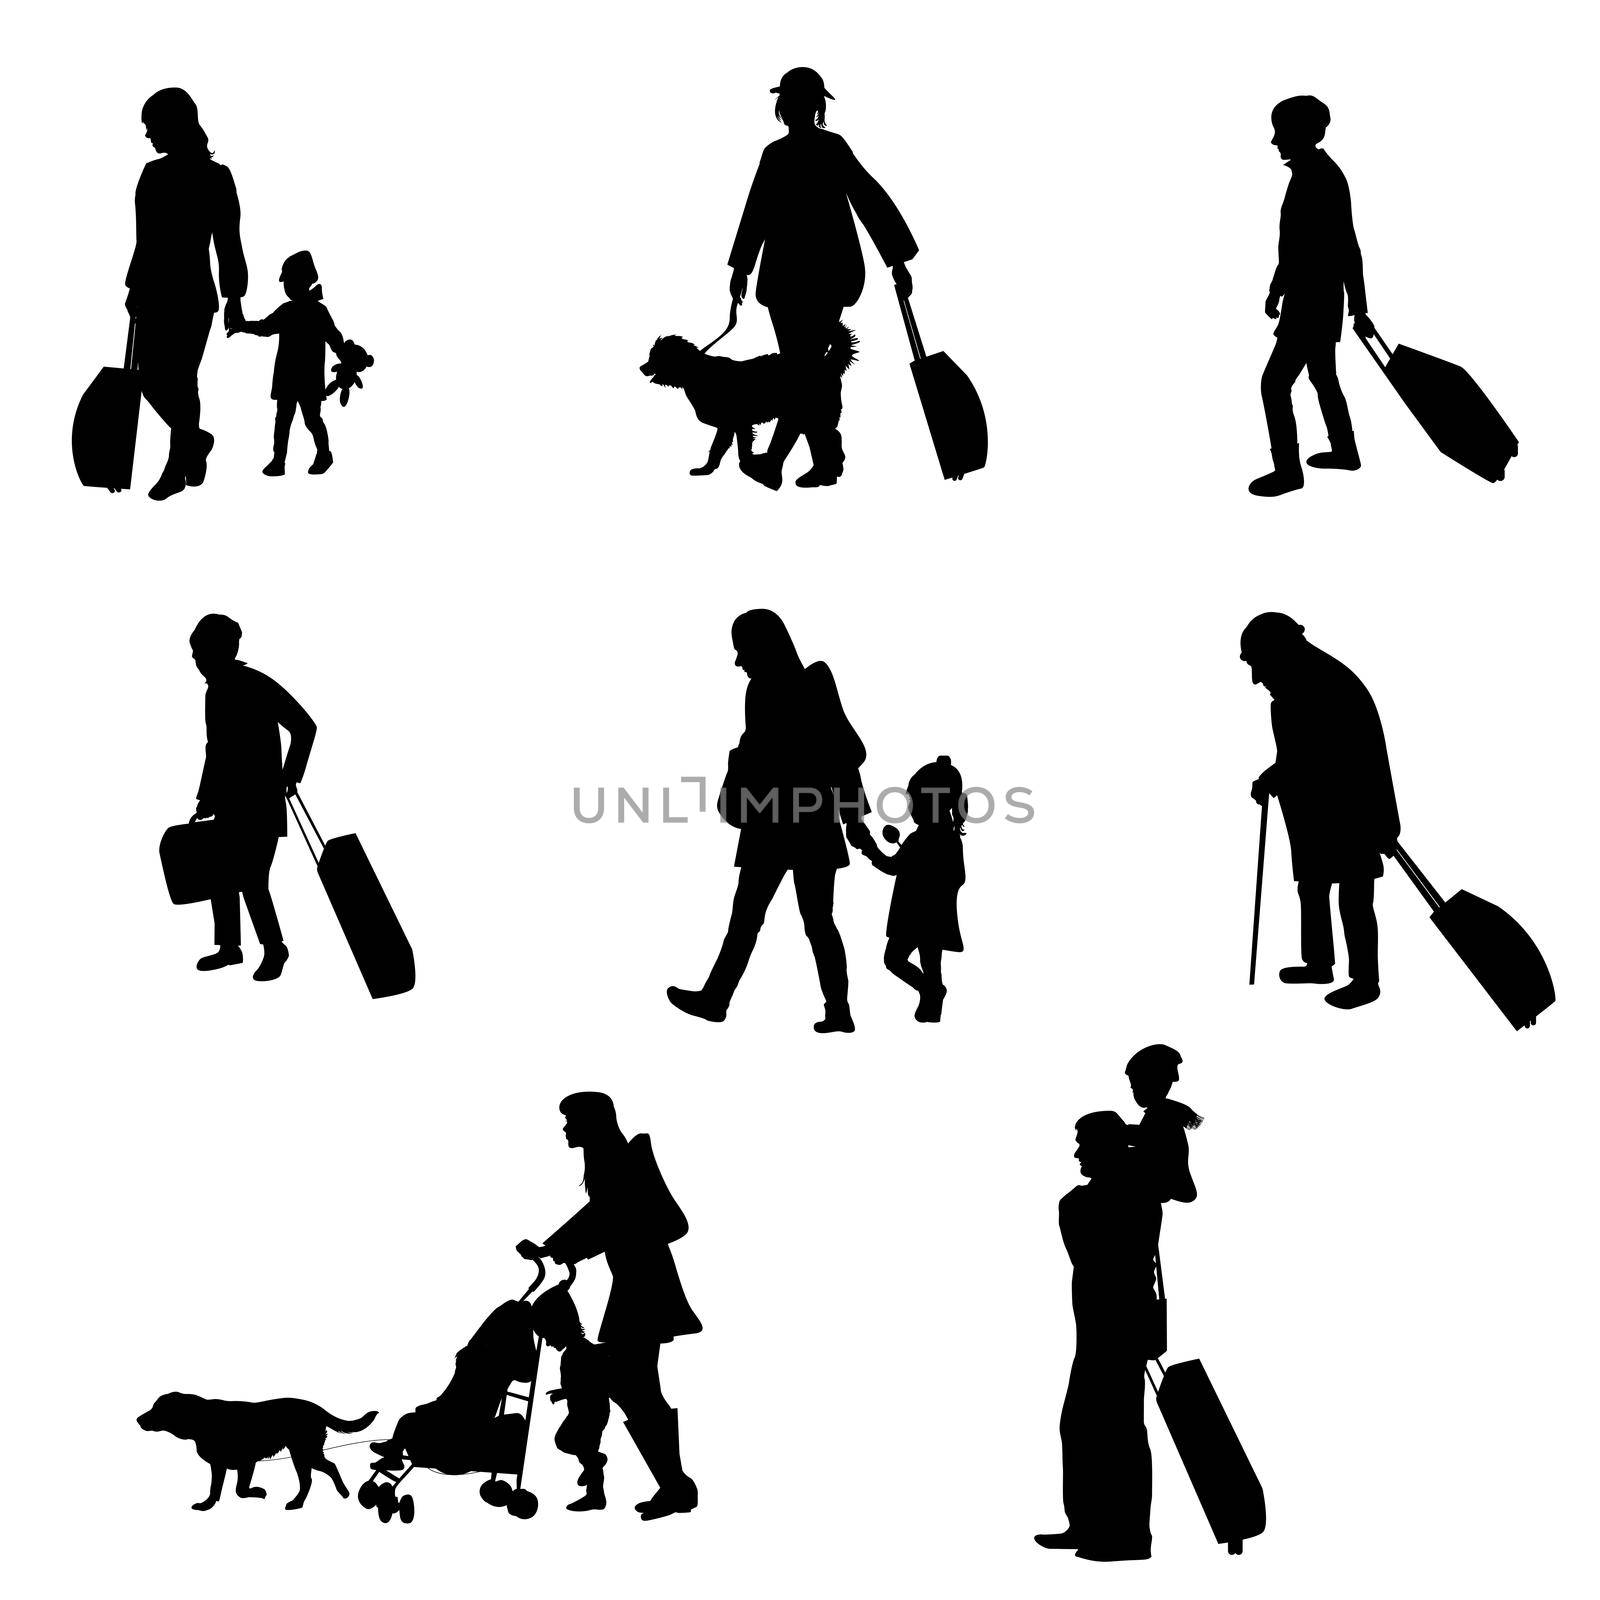 Silhouettes of refugees on white background by hibrida13